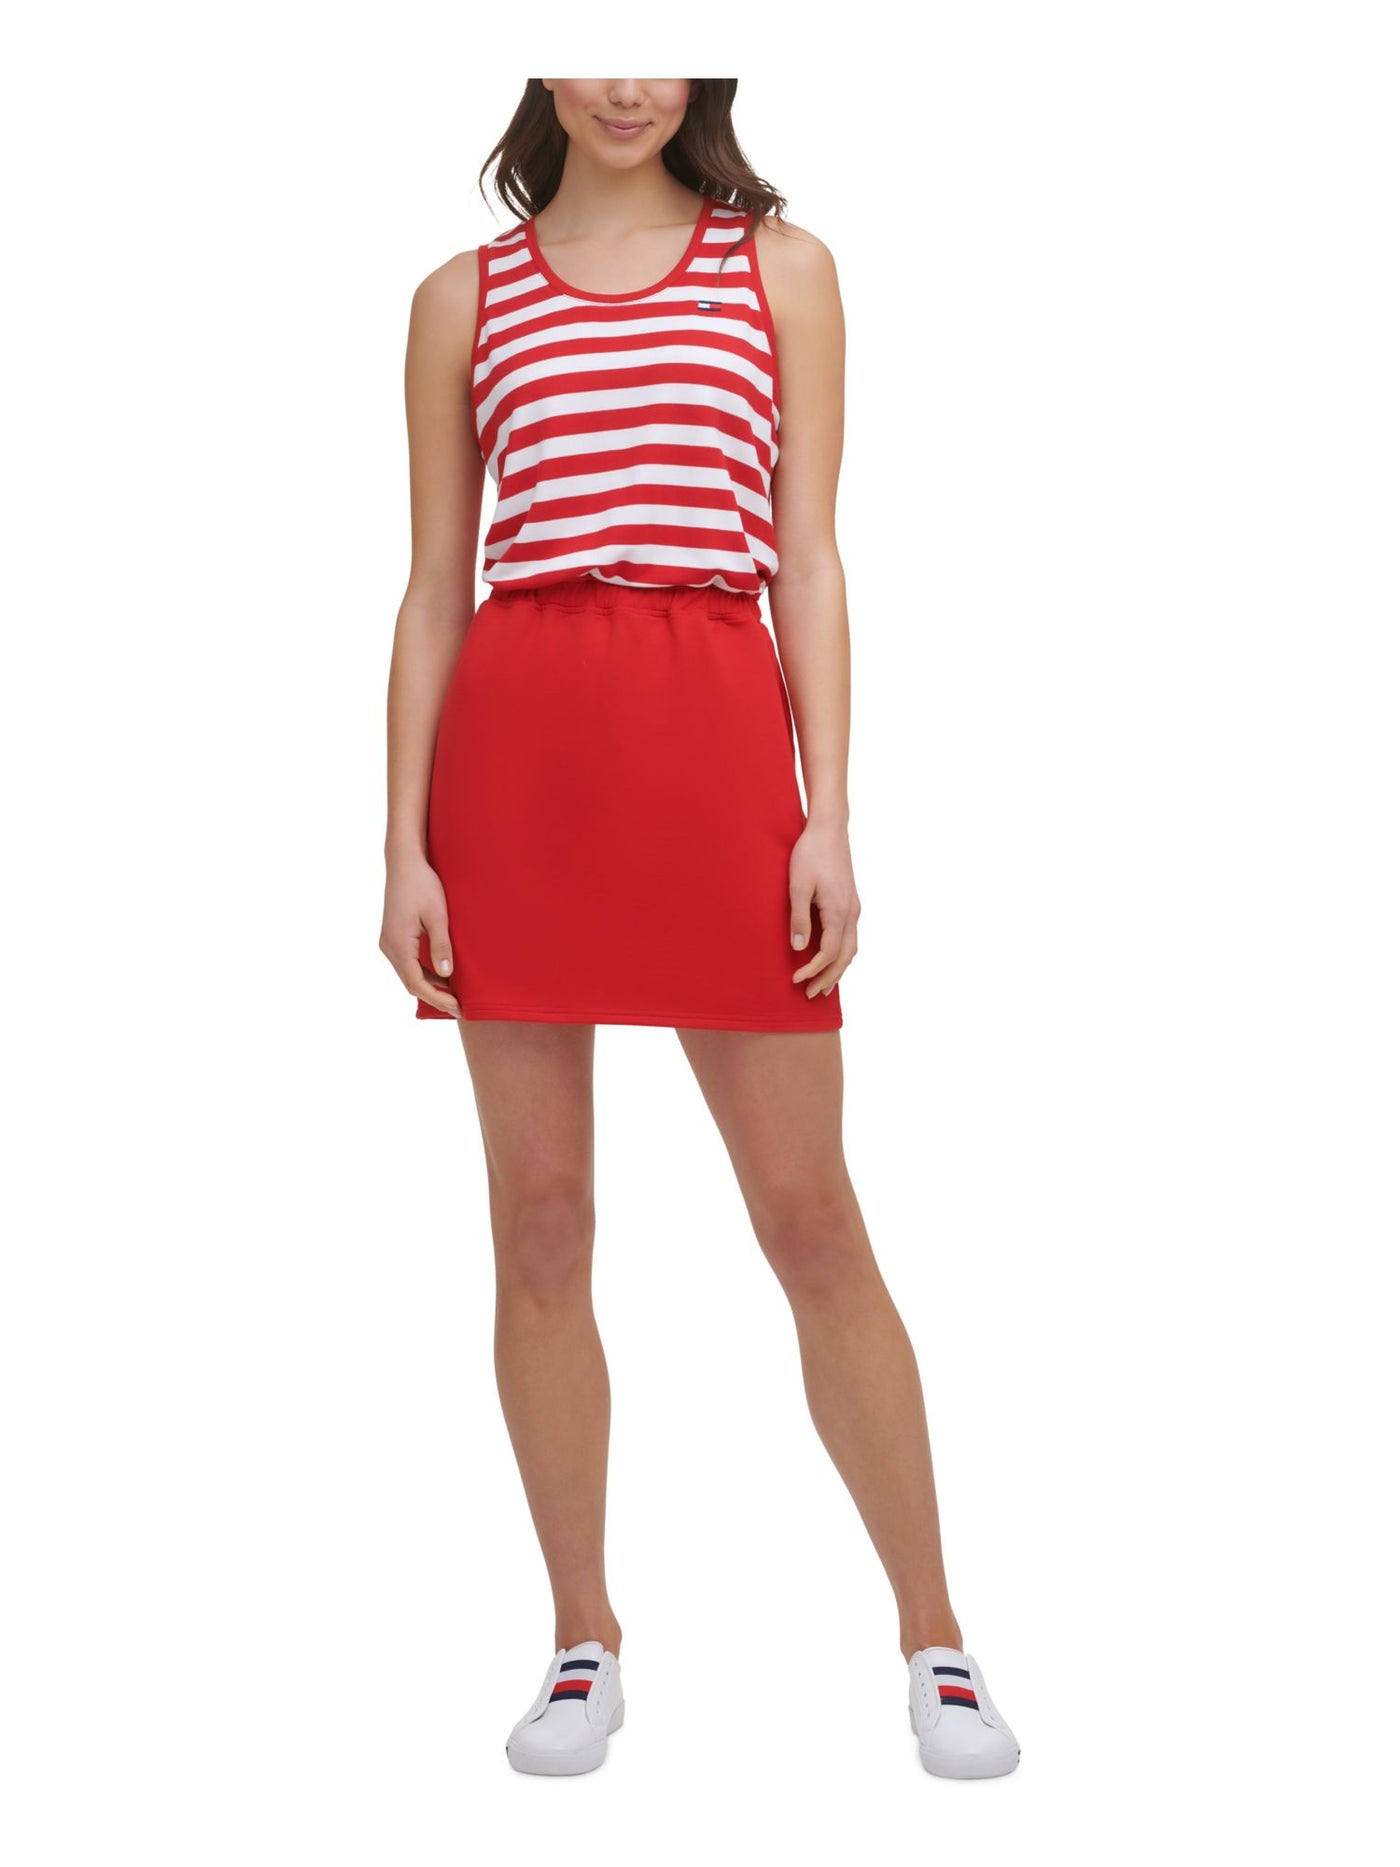 TOMMY HILFIGER Womens Red Stretch Embroidered Terry Cinched-waist Striped Sleeveless Scoop Neck Short Sheath Dress XS